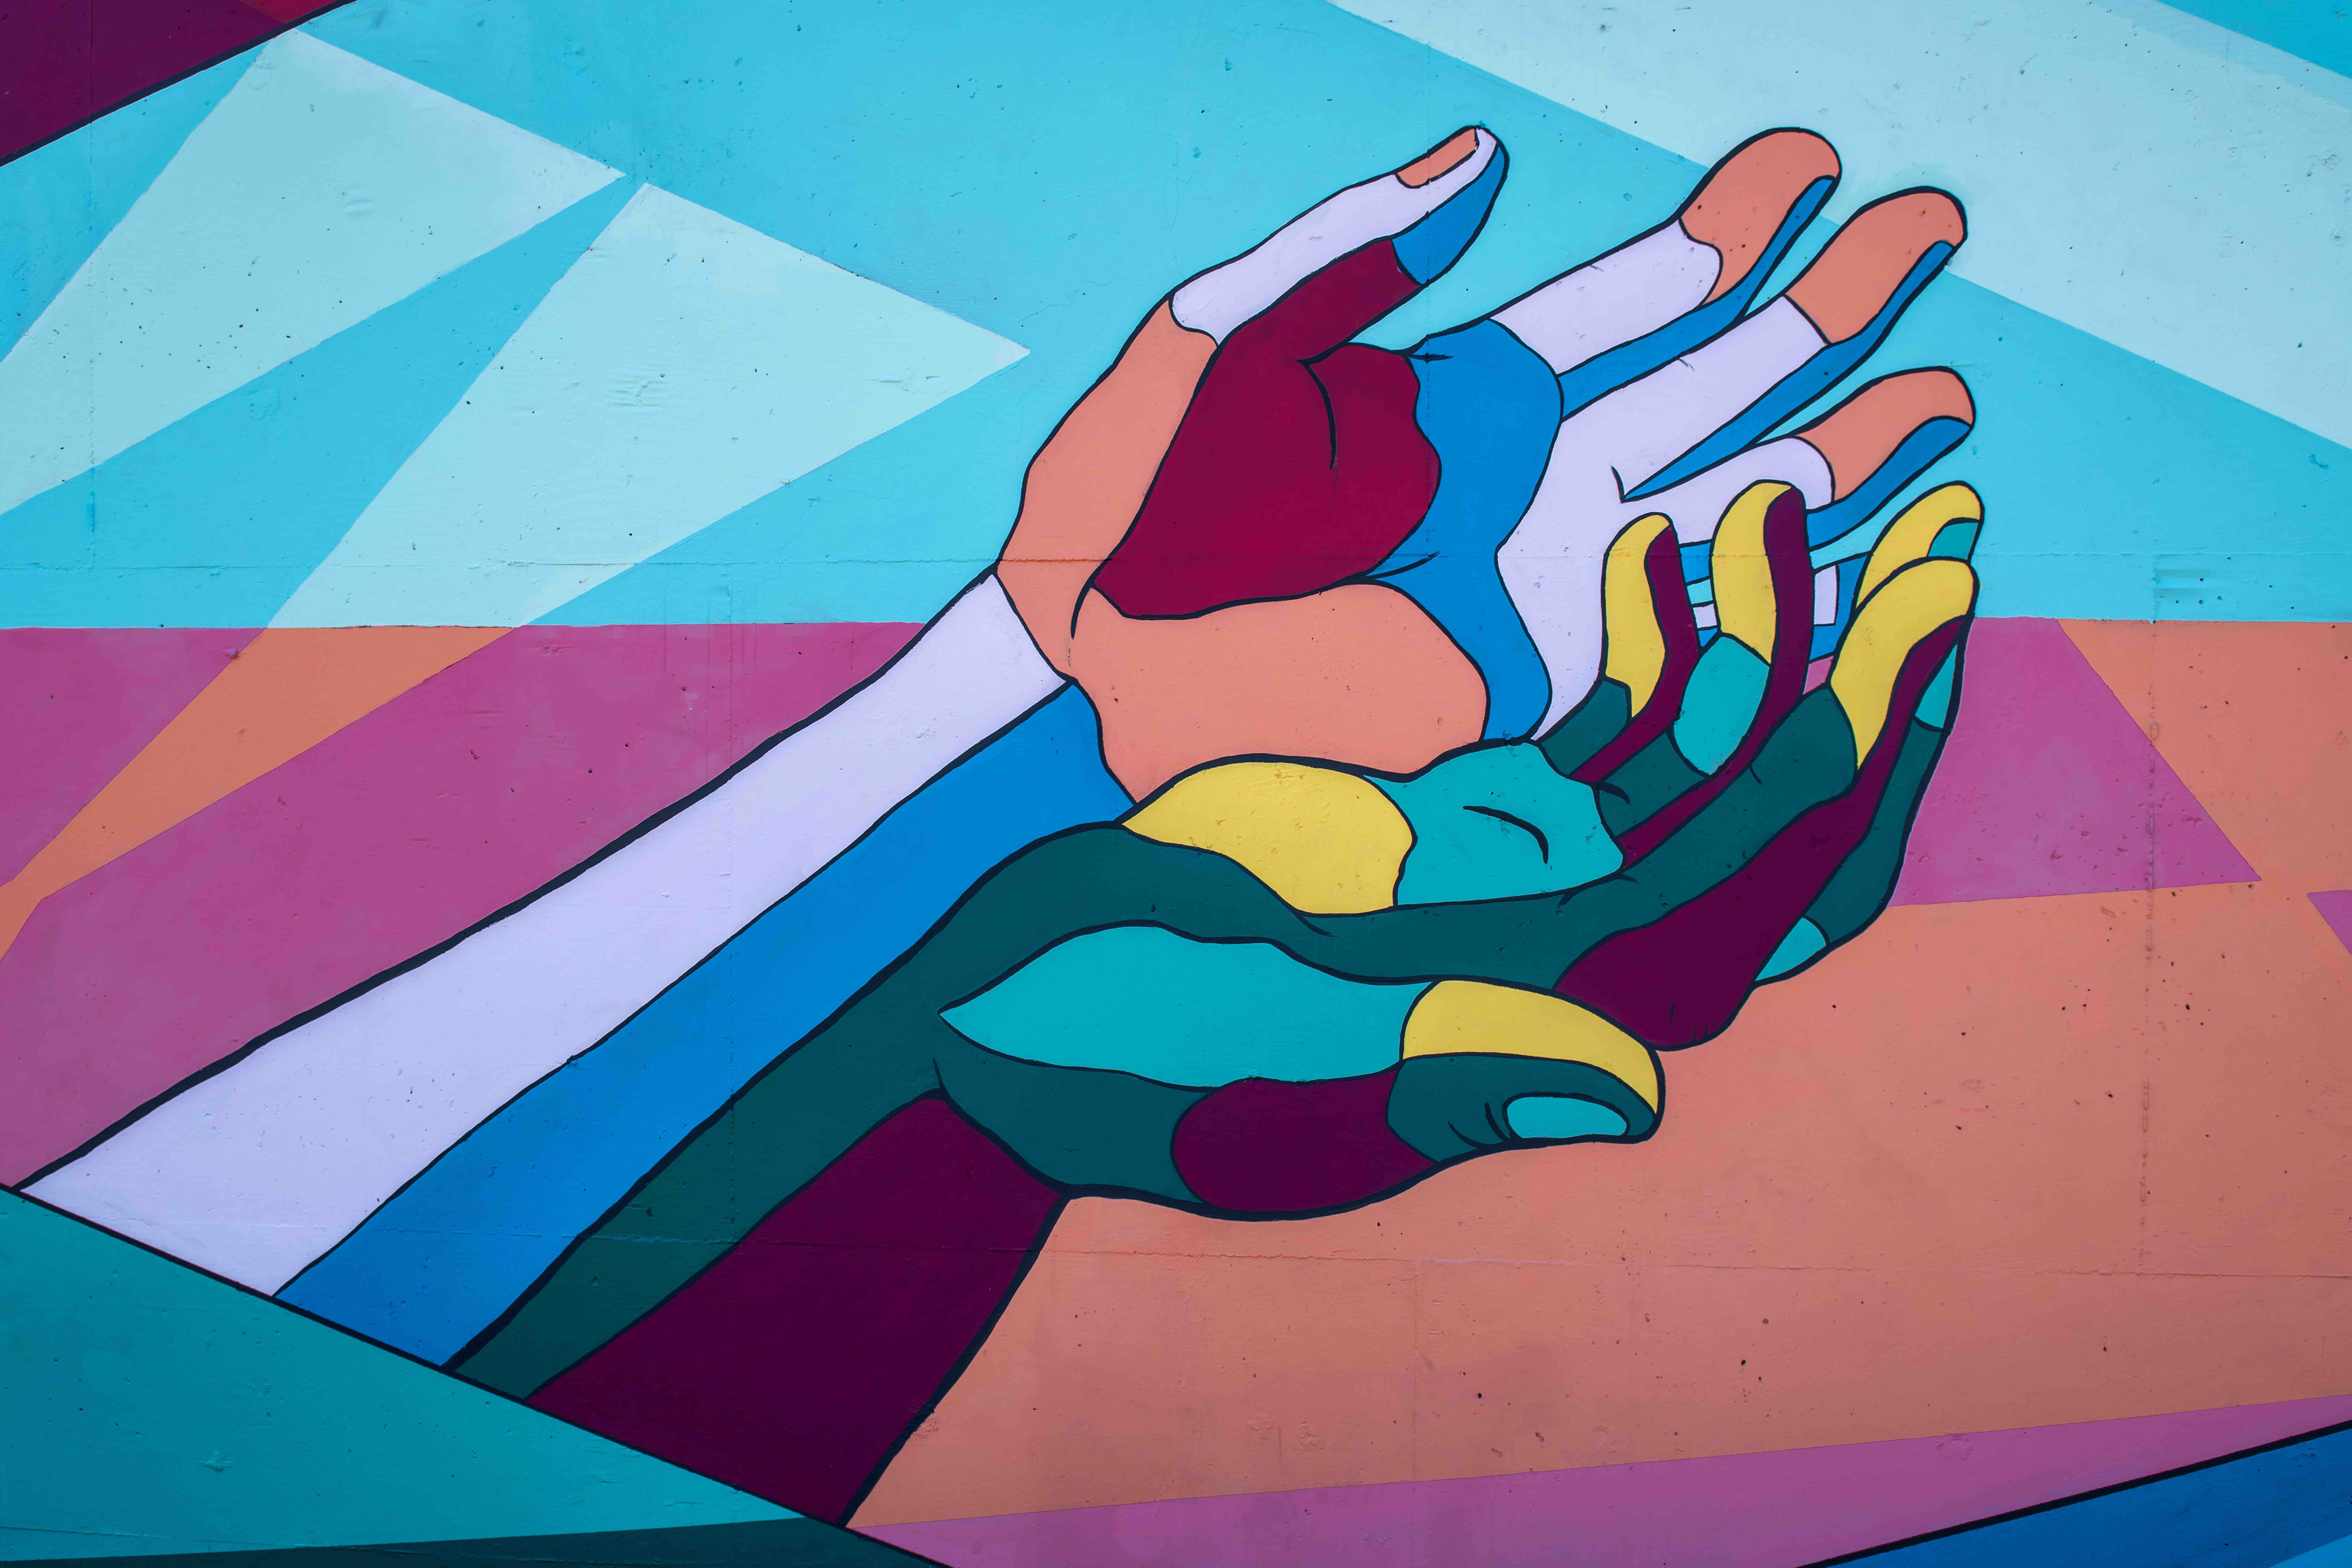 Painting of hands reaching out made of different colours representing equality